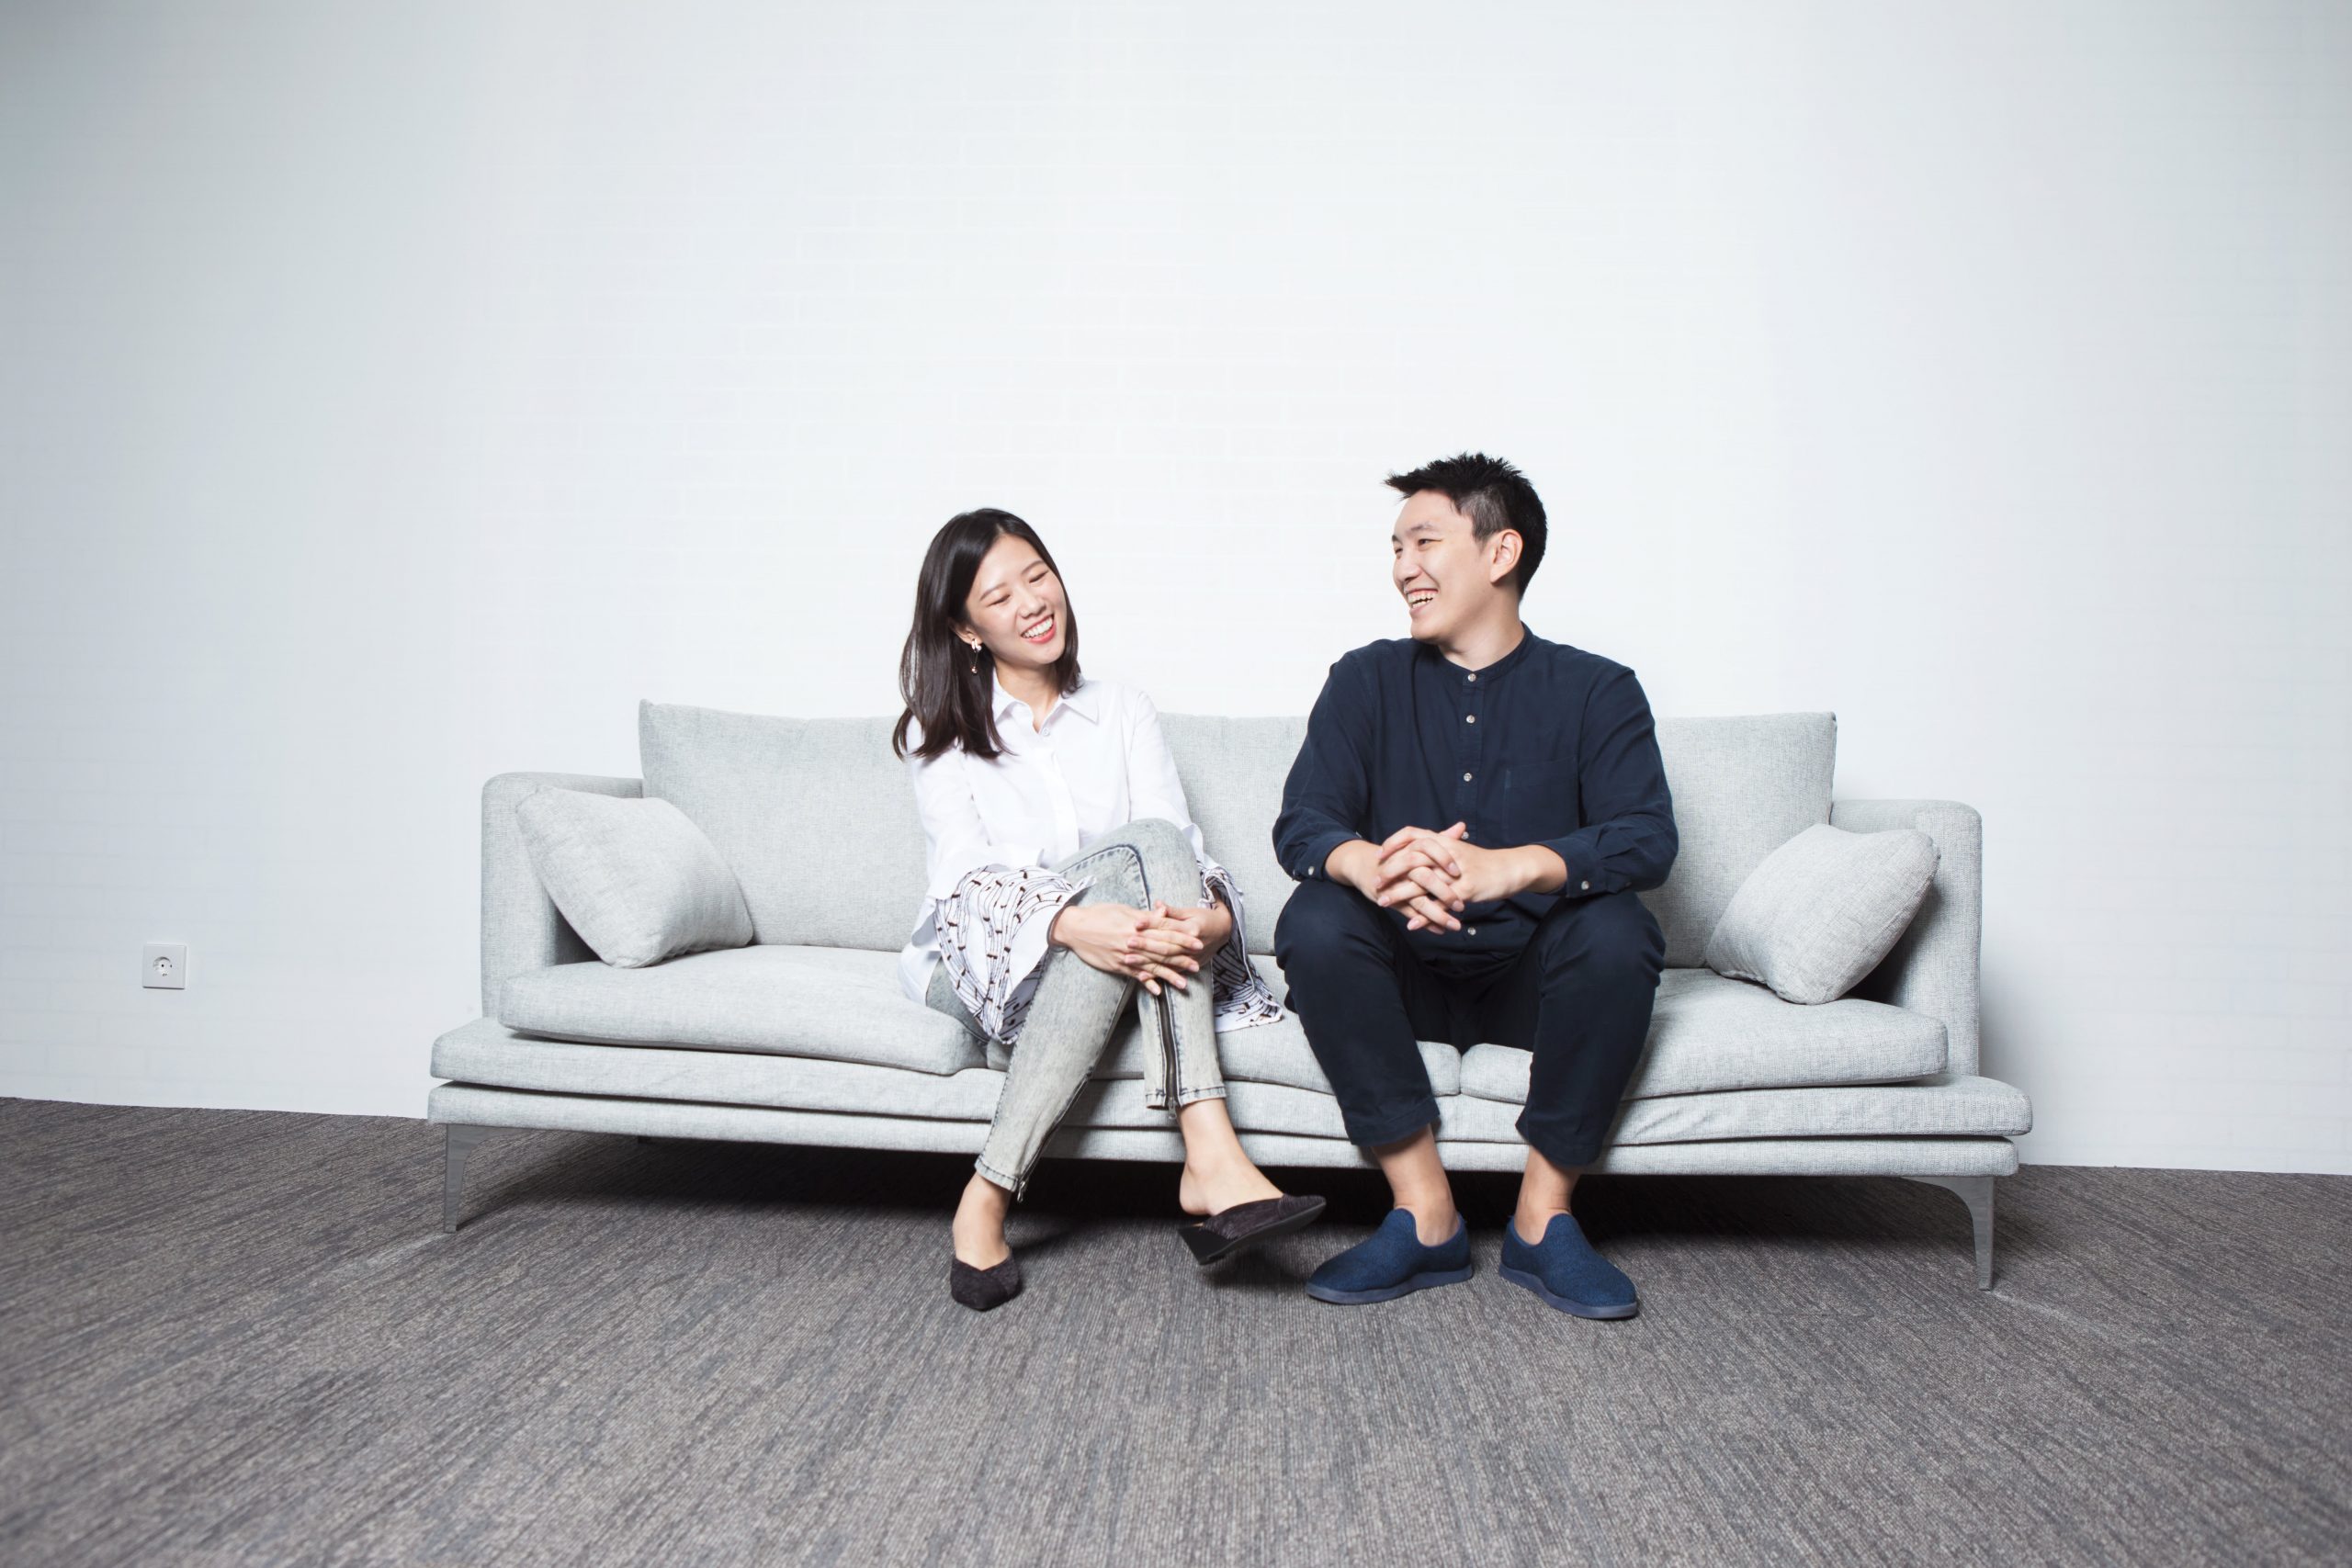 This husband-and-wife team shares their tips for going into business together